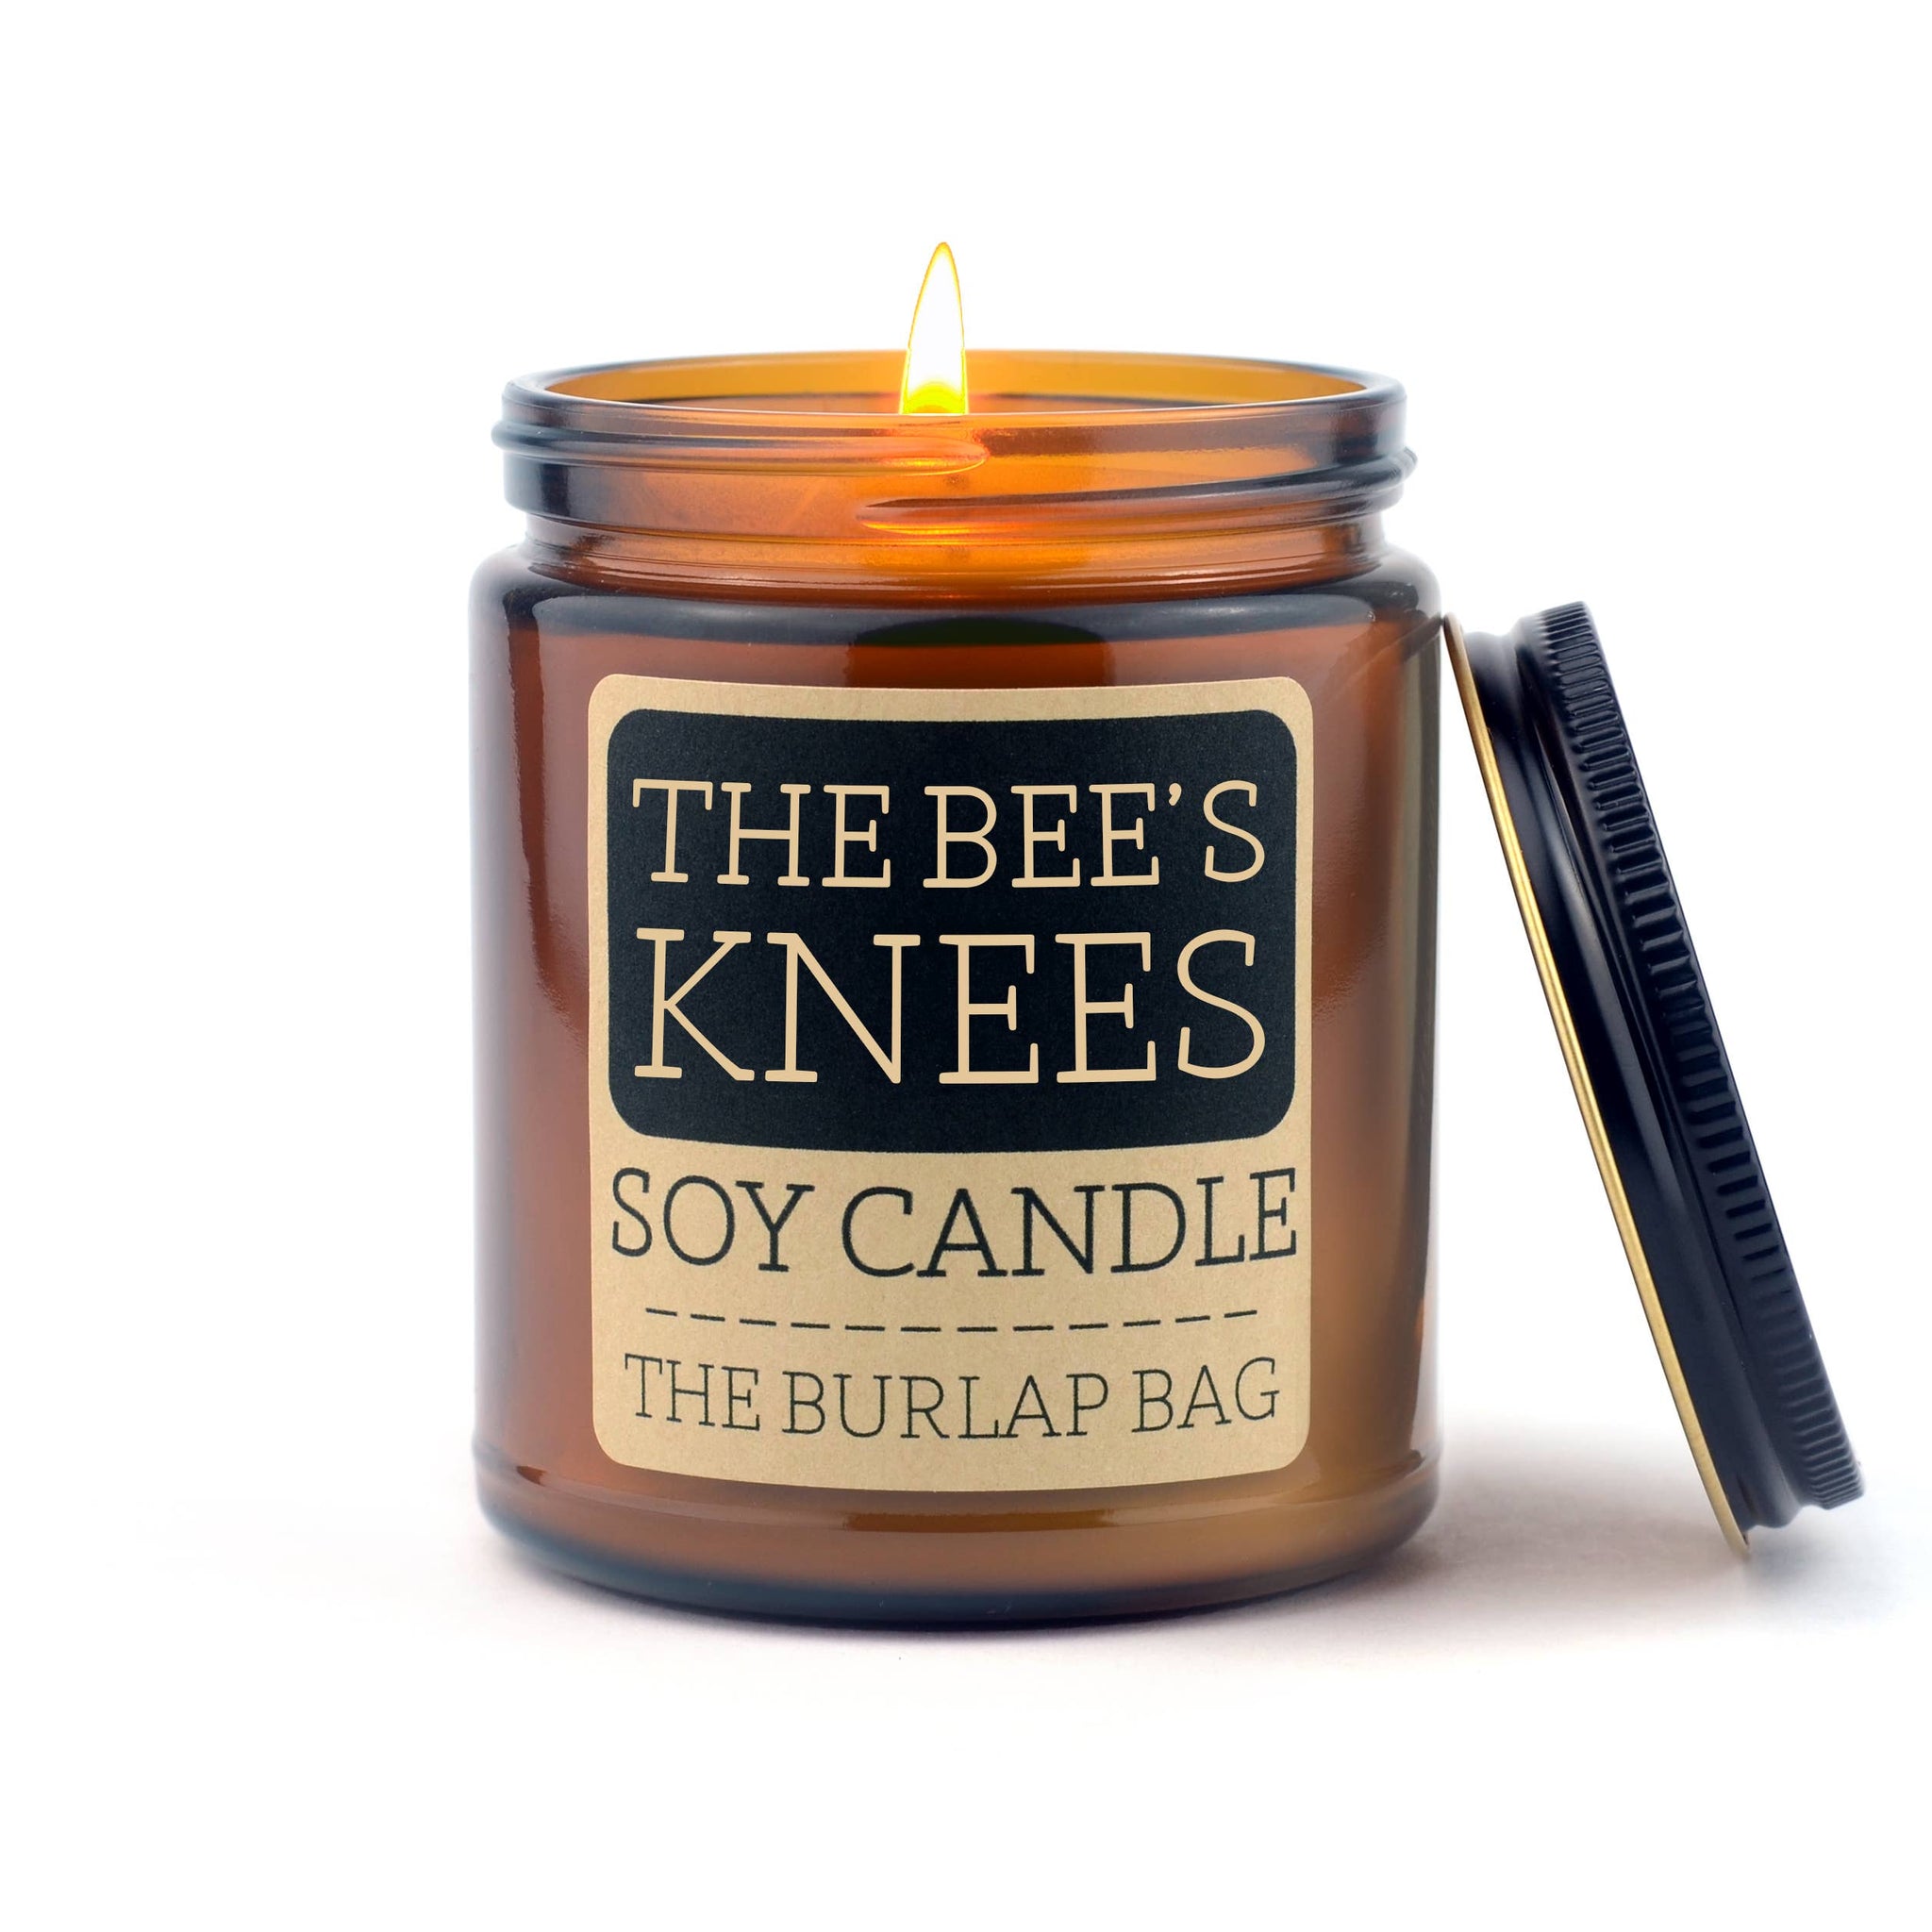 The Bee's Knees Soy Candle